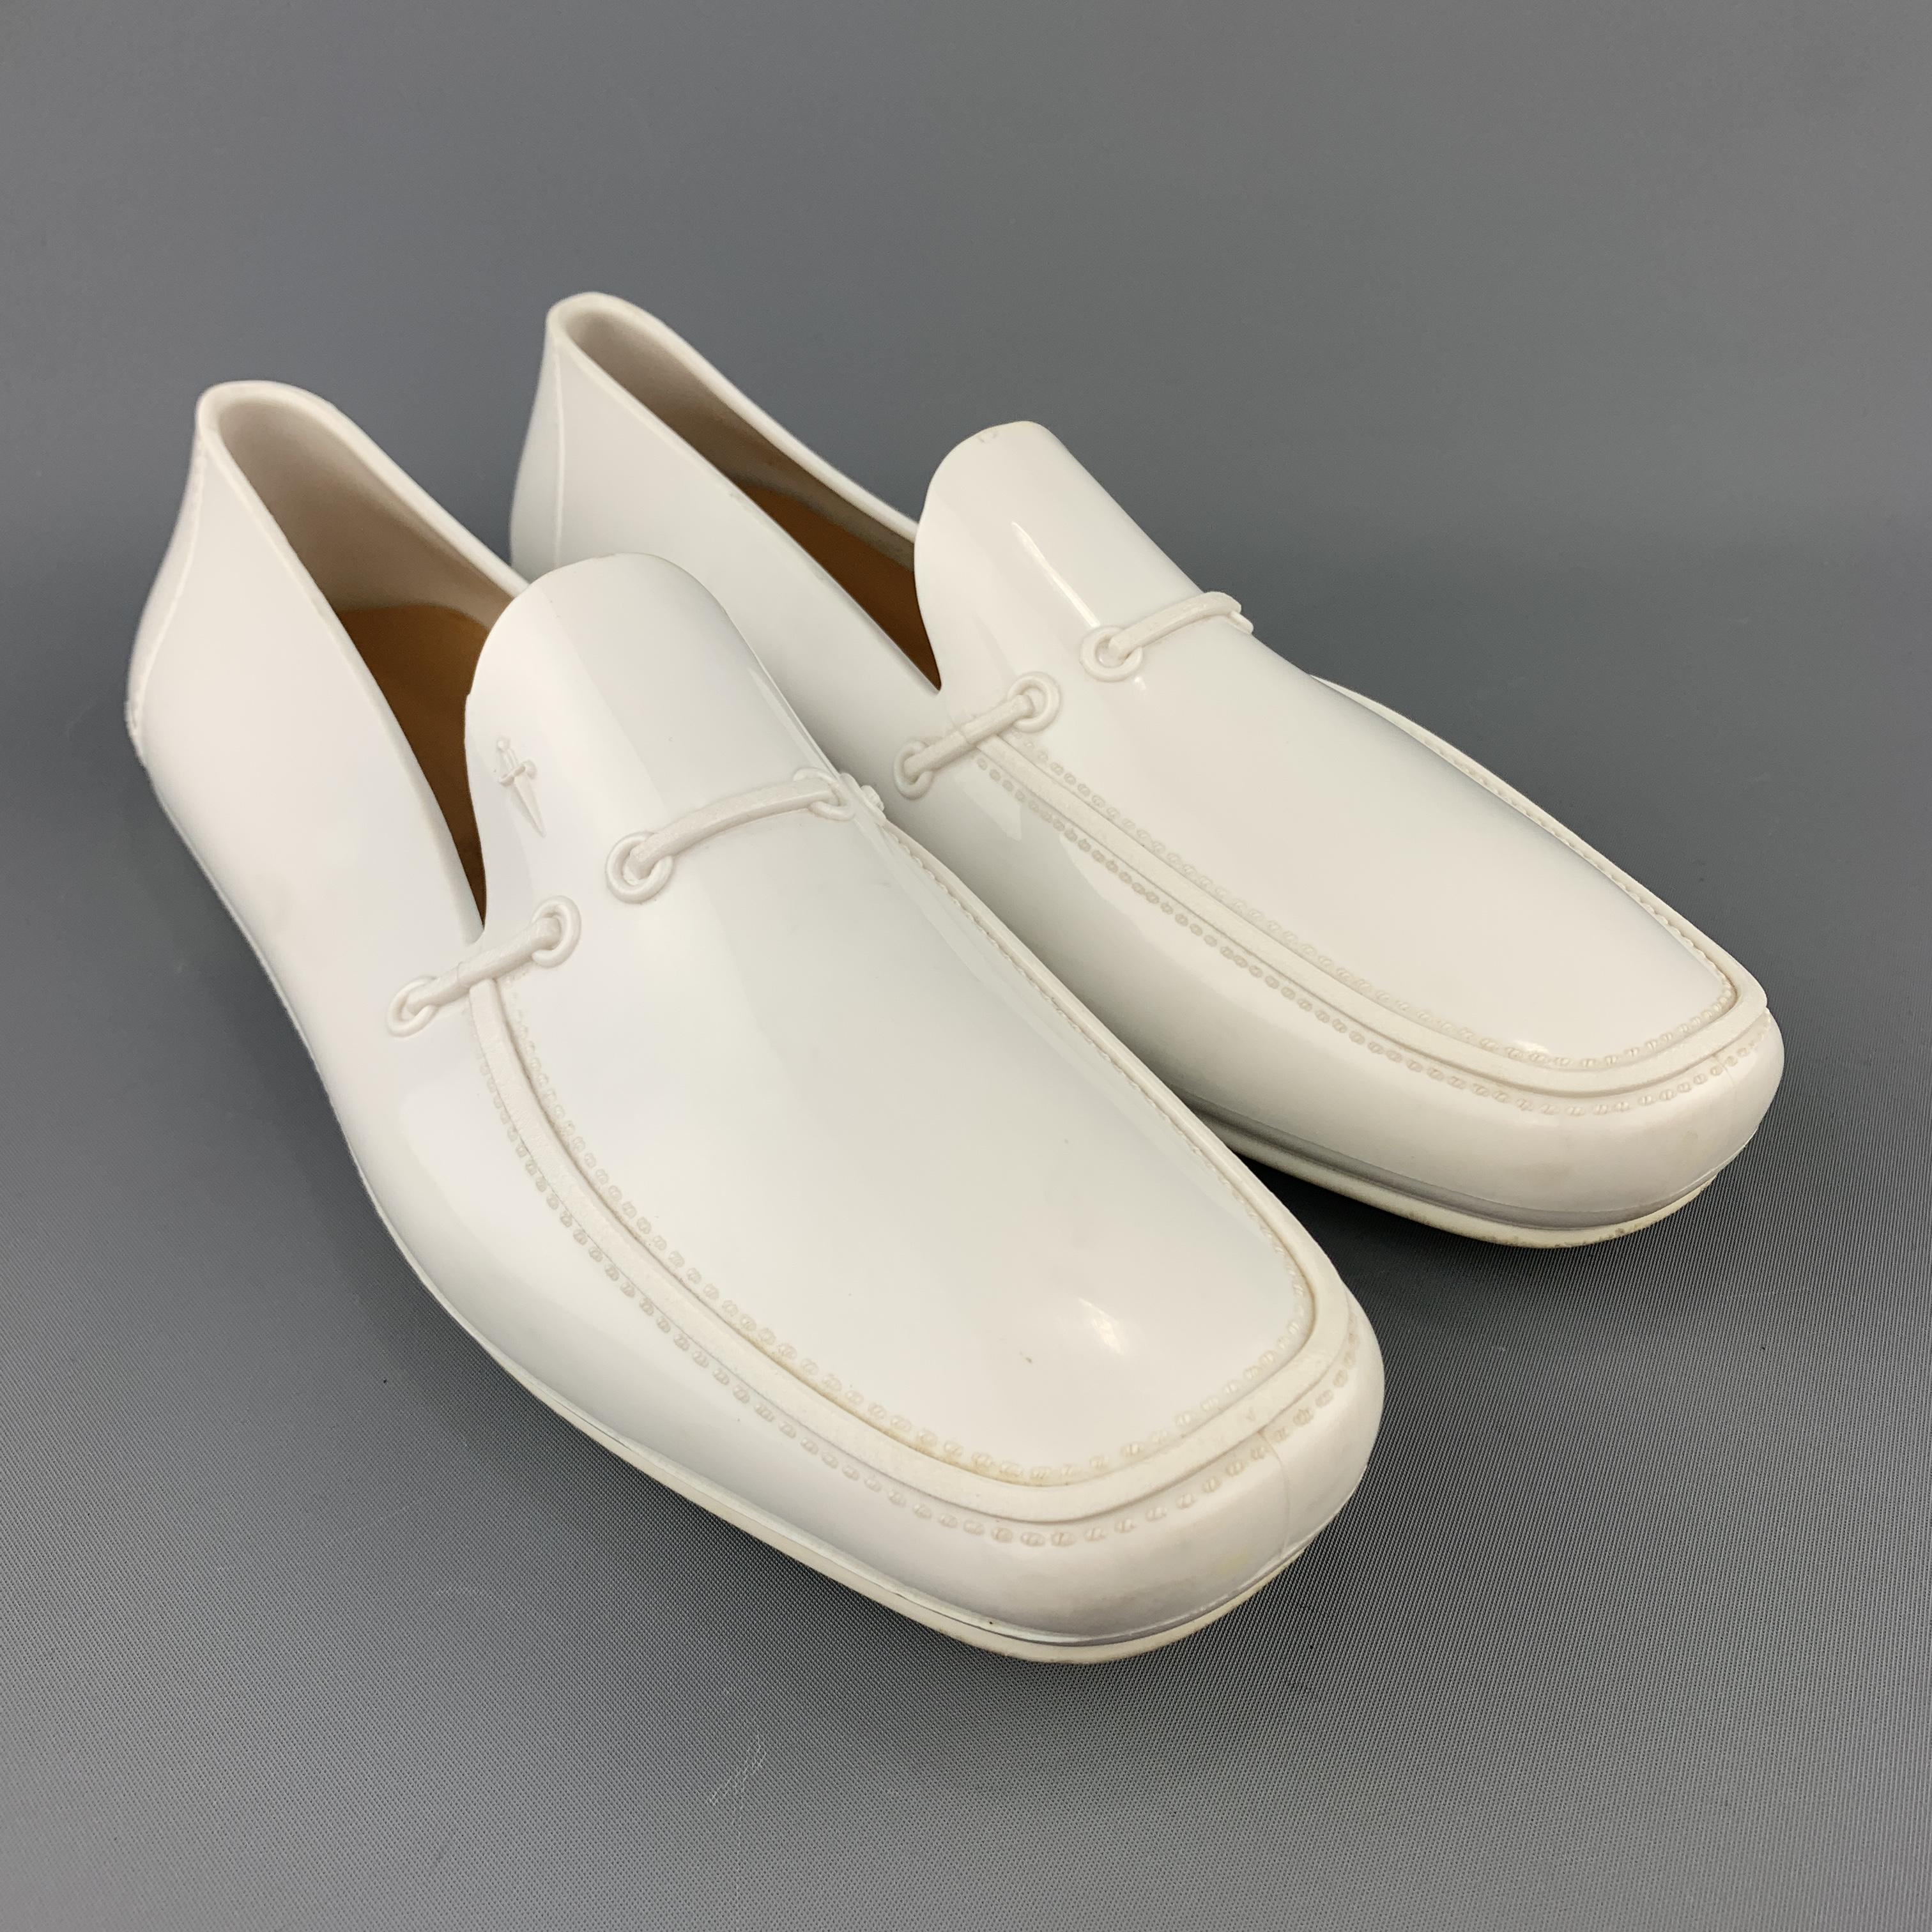 CESARE PACIOTTI loafers come in white rubber with an apron toe, mock woven accent and dagger logo. . Minor wear. Made in Italy.
 
Good Pre-Owned Condition.
Marked: (no size)
 
Outsole: 11.75 x 4 in.